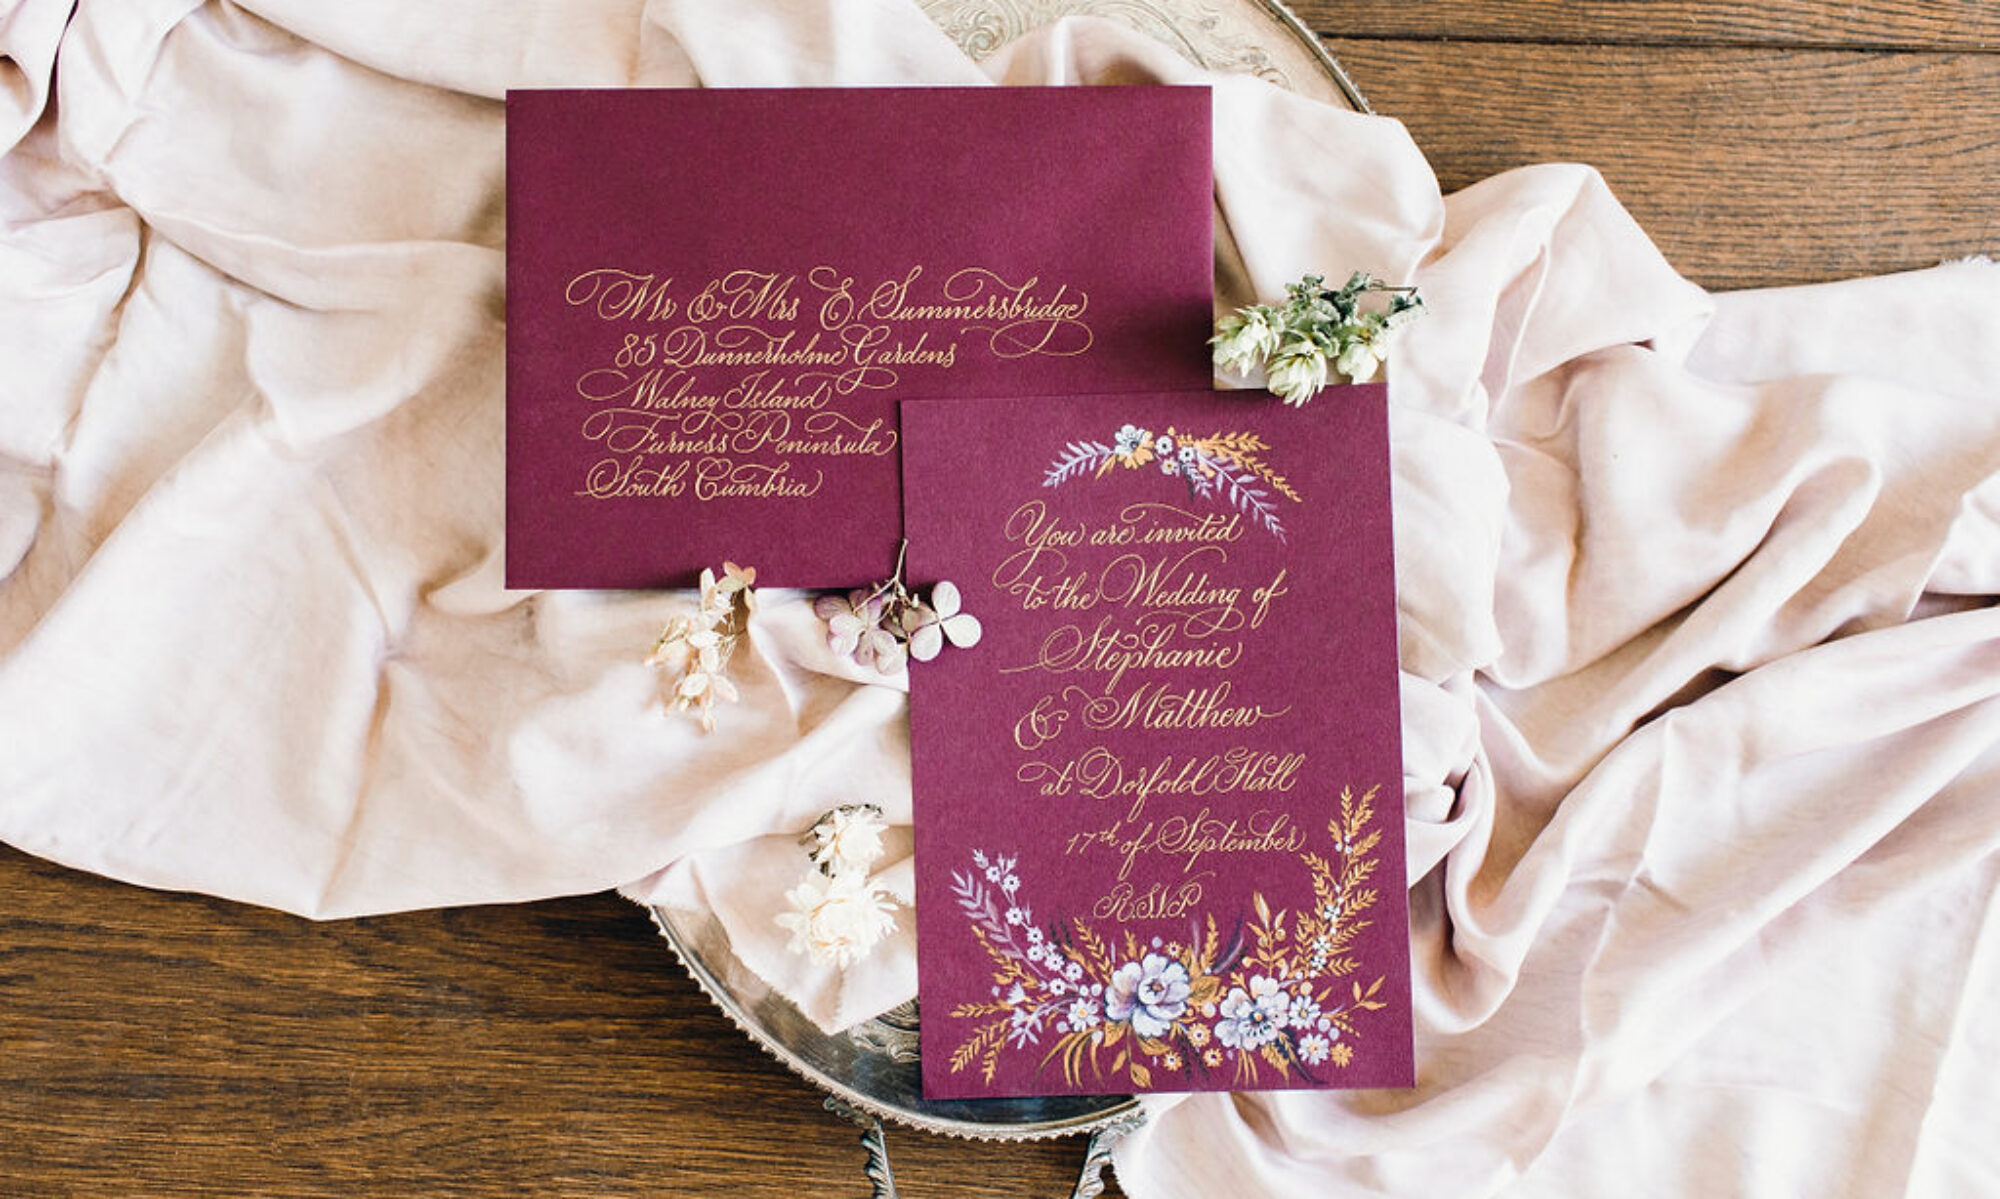 Swirly gold calligraphy on a burgundy wedding envelope and invitation. The invite is illustrated with white and gold flowers and leaves. The suite sits on scrunched up silk with hydrangea flowers and hops around it